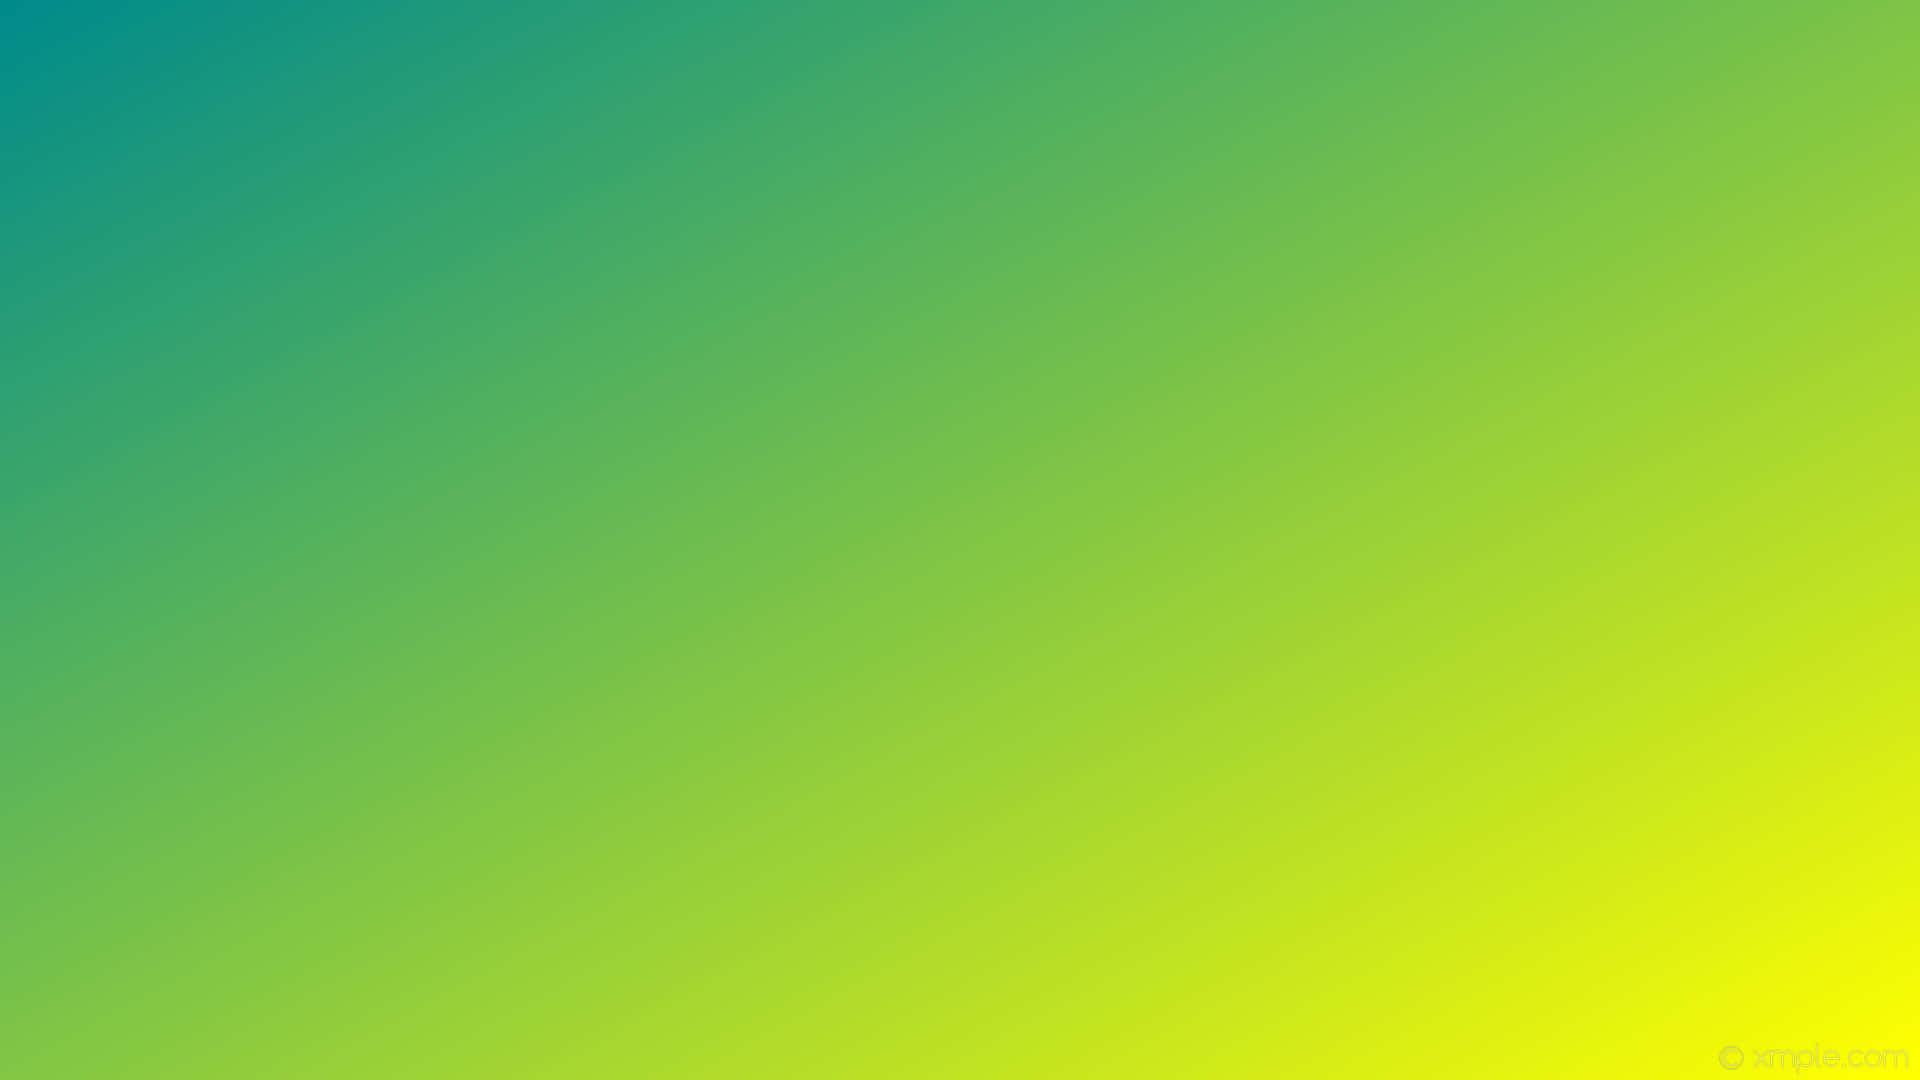 A vibrant hello from our yellow gradient background